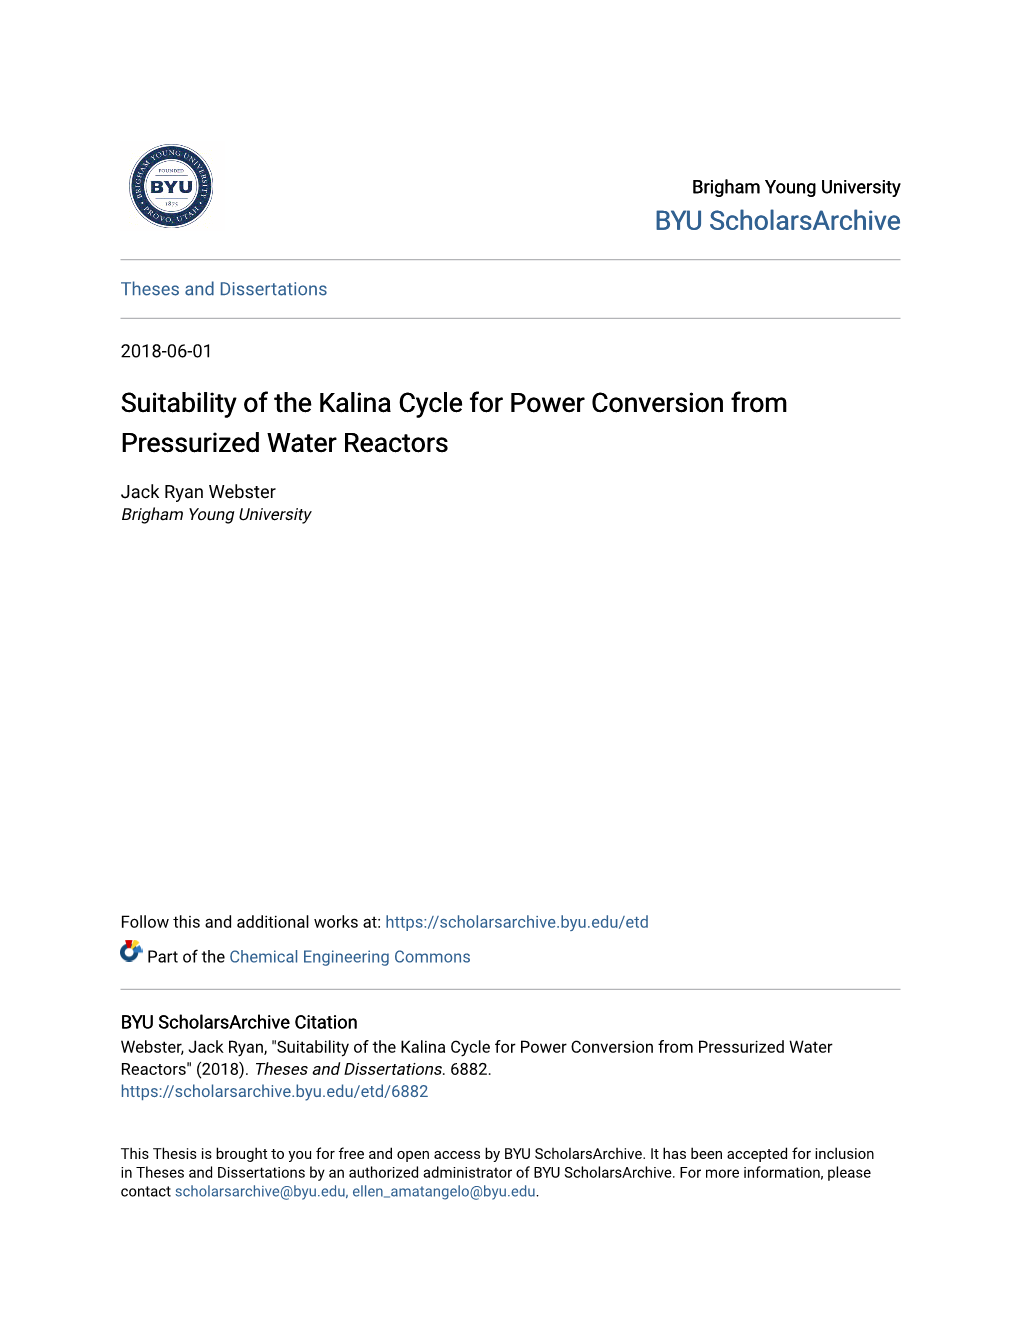 Suitability of the Kalina Cycle for Power Conversion from Pressurized Water Reactors